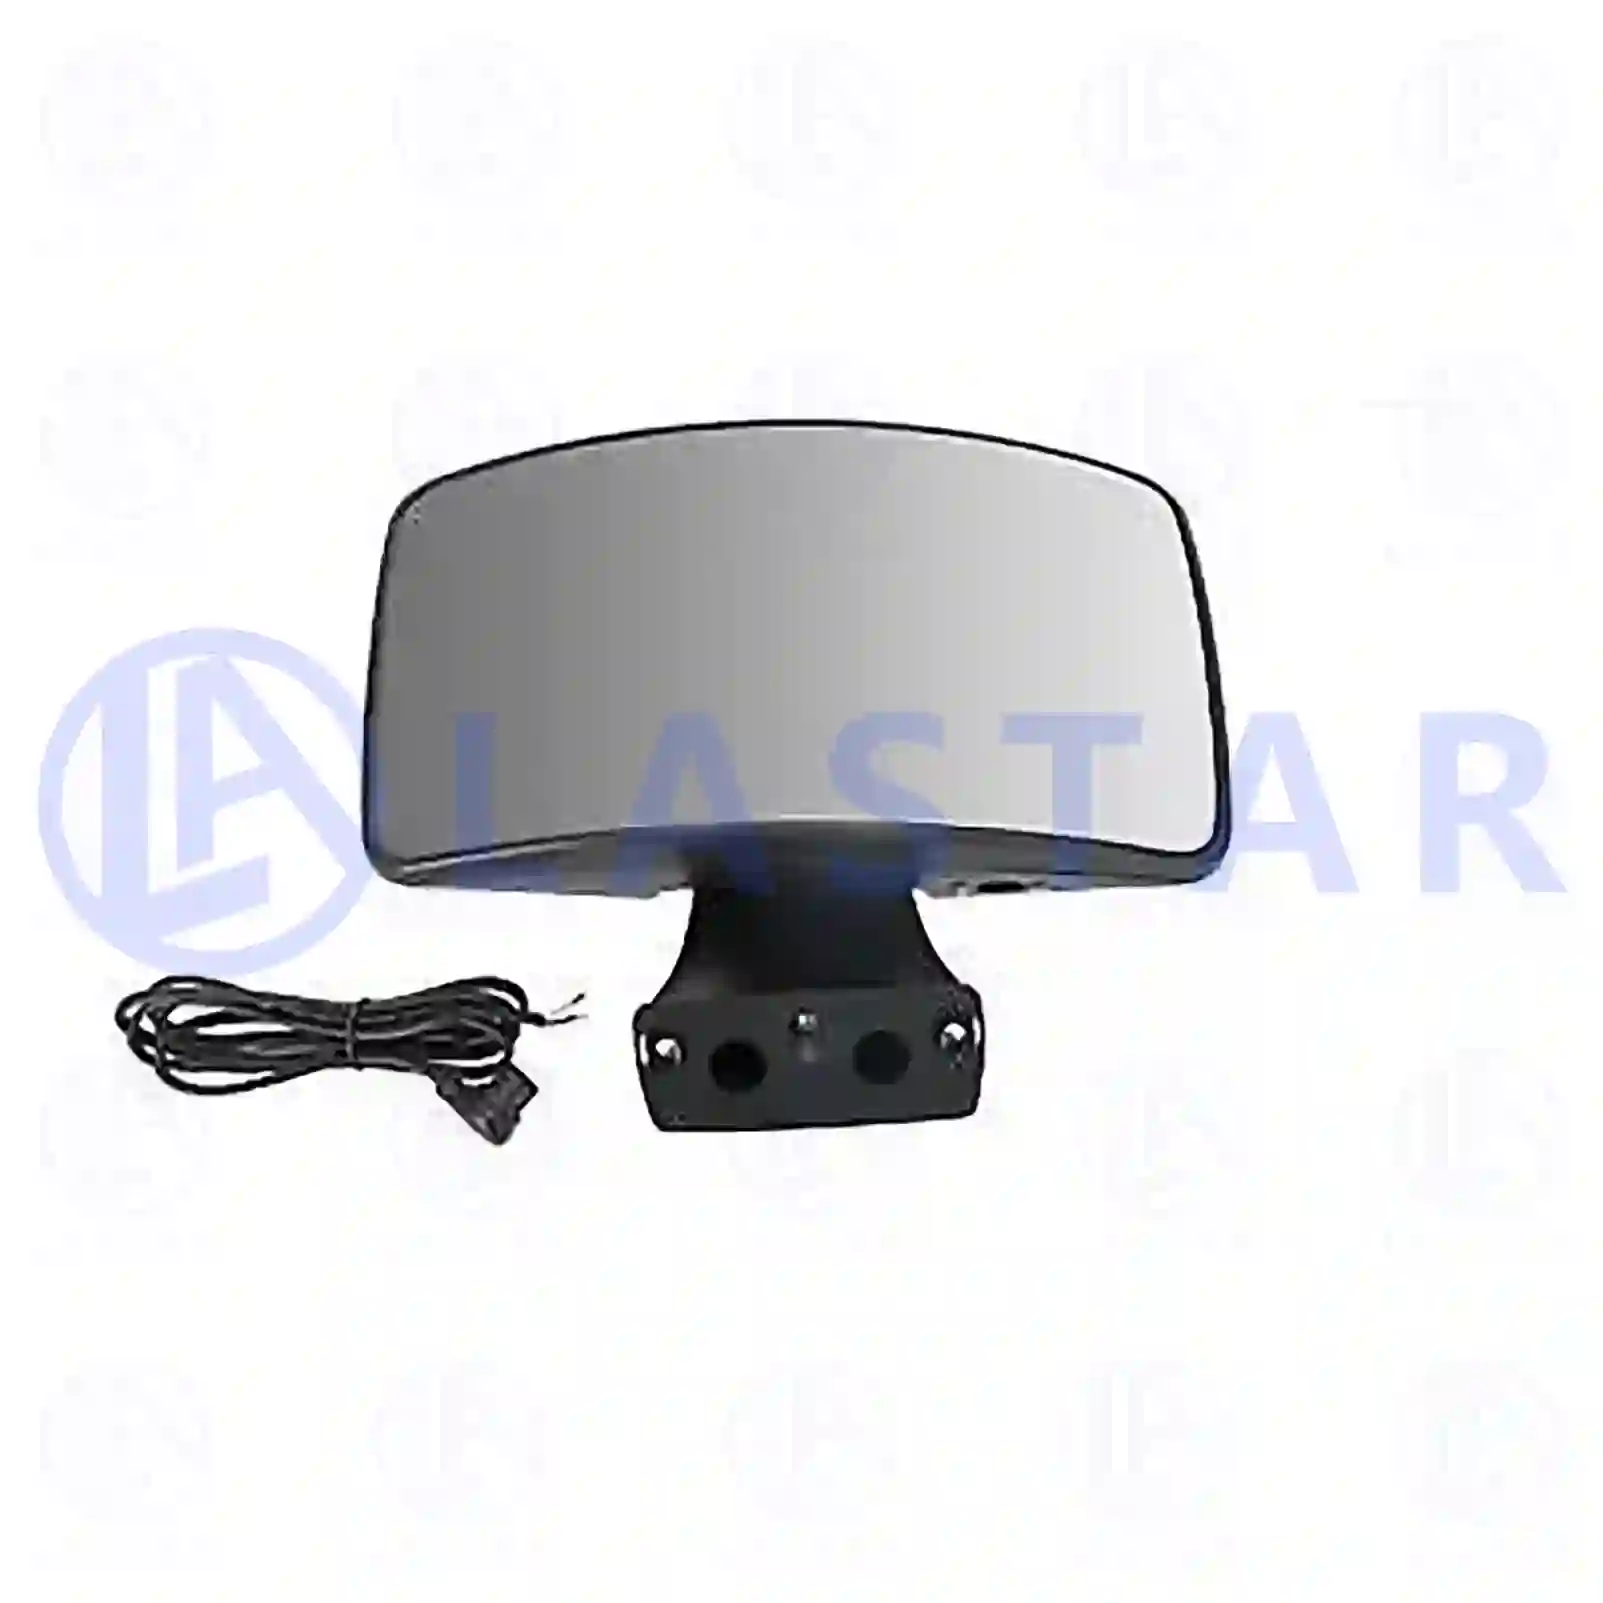 Kerb observation mirror, heated, 77718547, 82637306034, 8263 ||  77718547 Lastar Spare Part | Truck Spare Parts, Auotomotive Spare Parts Kerb observation mirror, heated, 77718547, 82637306034, 8263 ||  77718547 Lastar Spare Part | Truck Spare Parts, Auotomotive Spare Parts